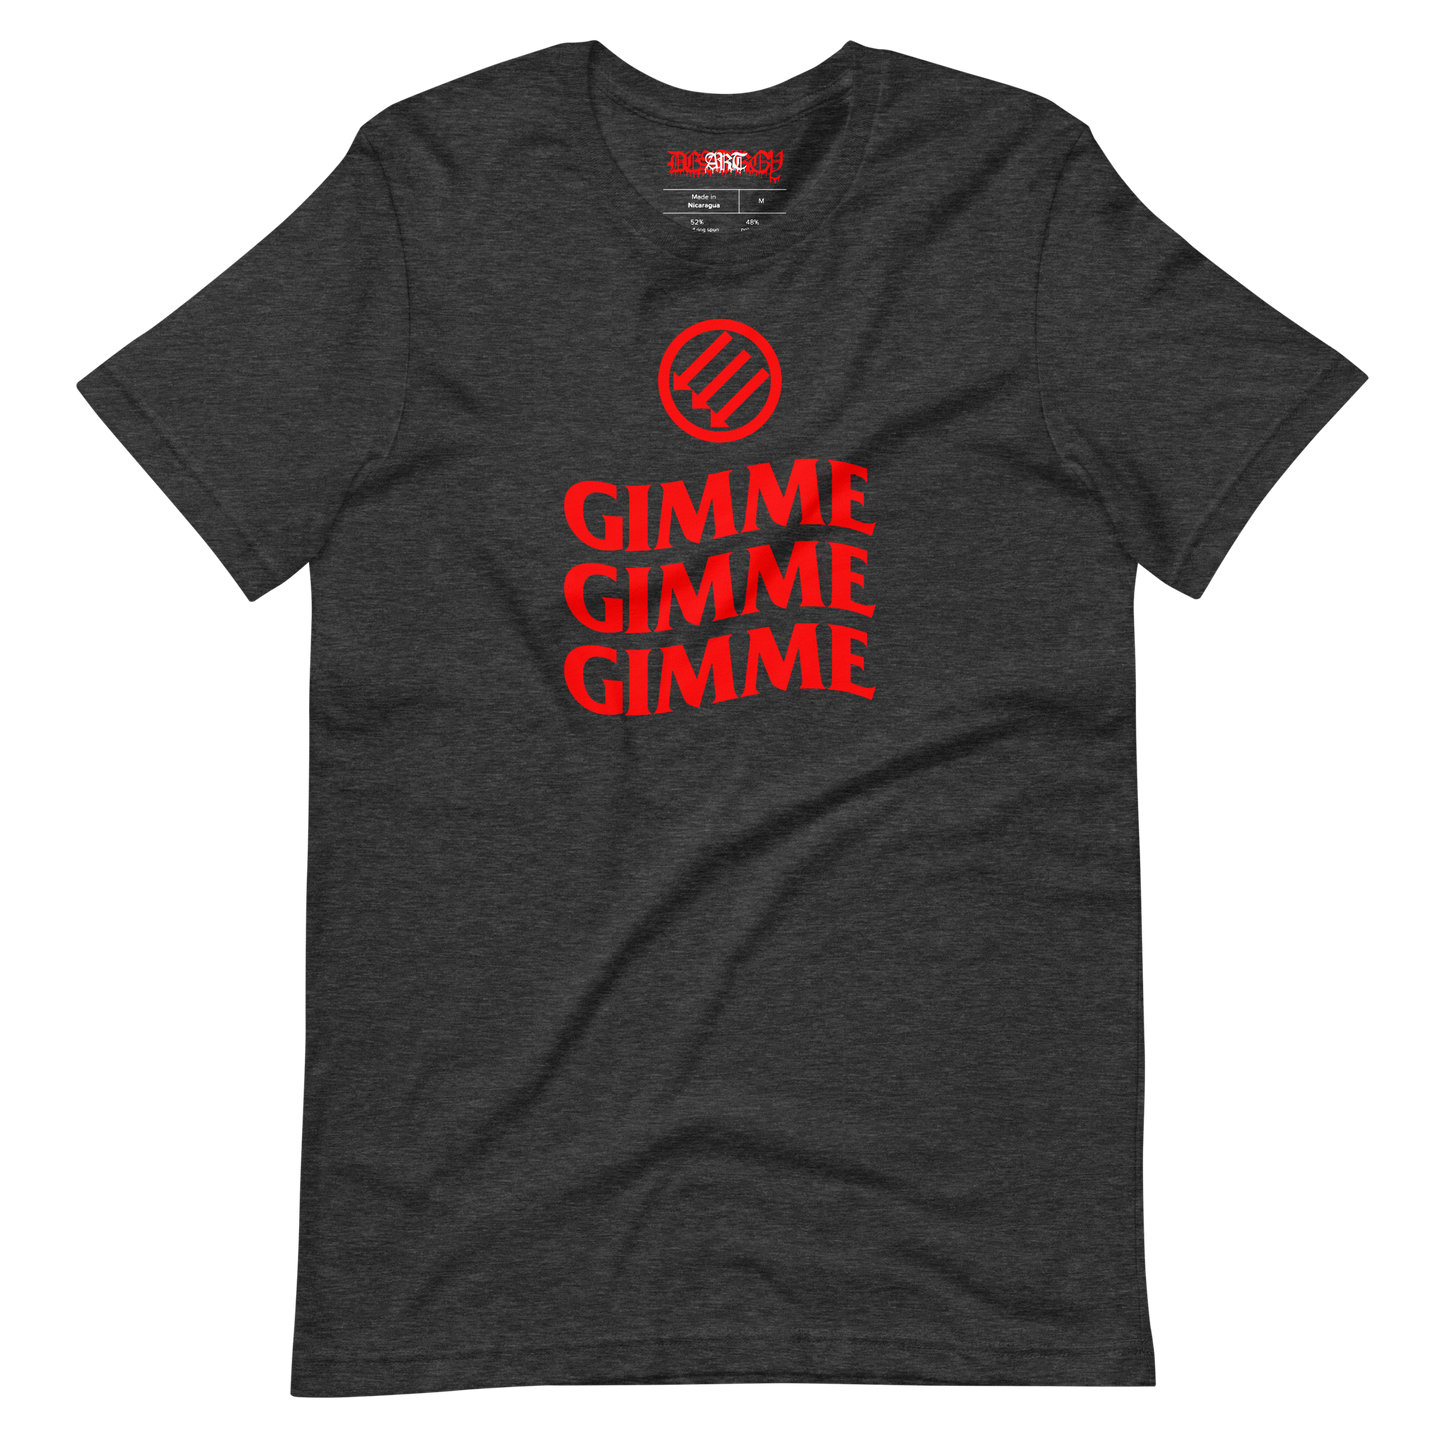 Stealworks "Gimme Gimme Gimme Antifascist" Red Tee